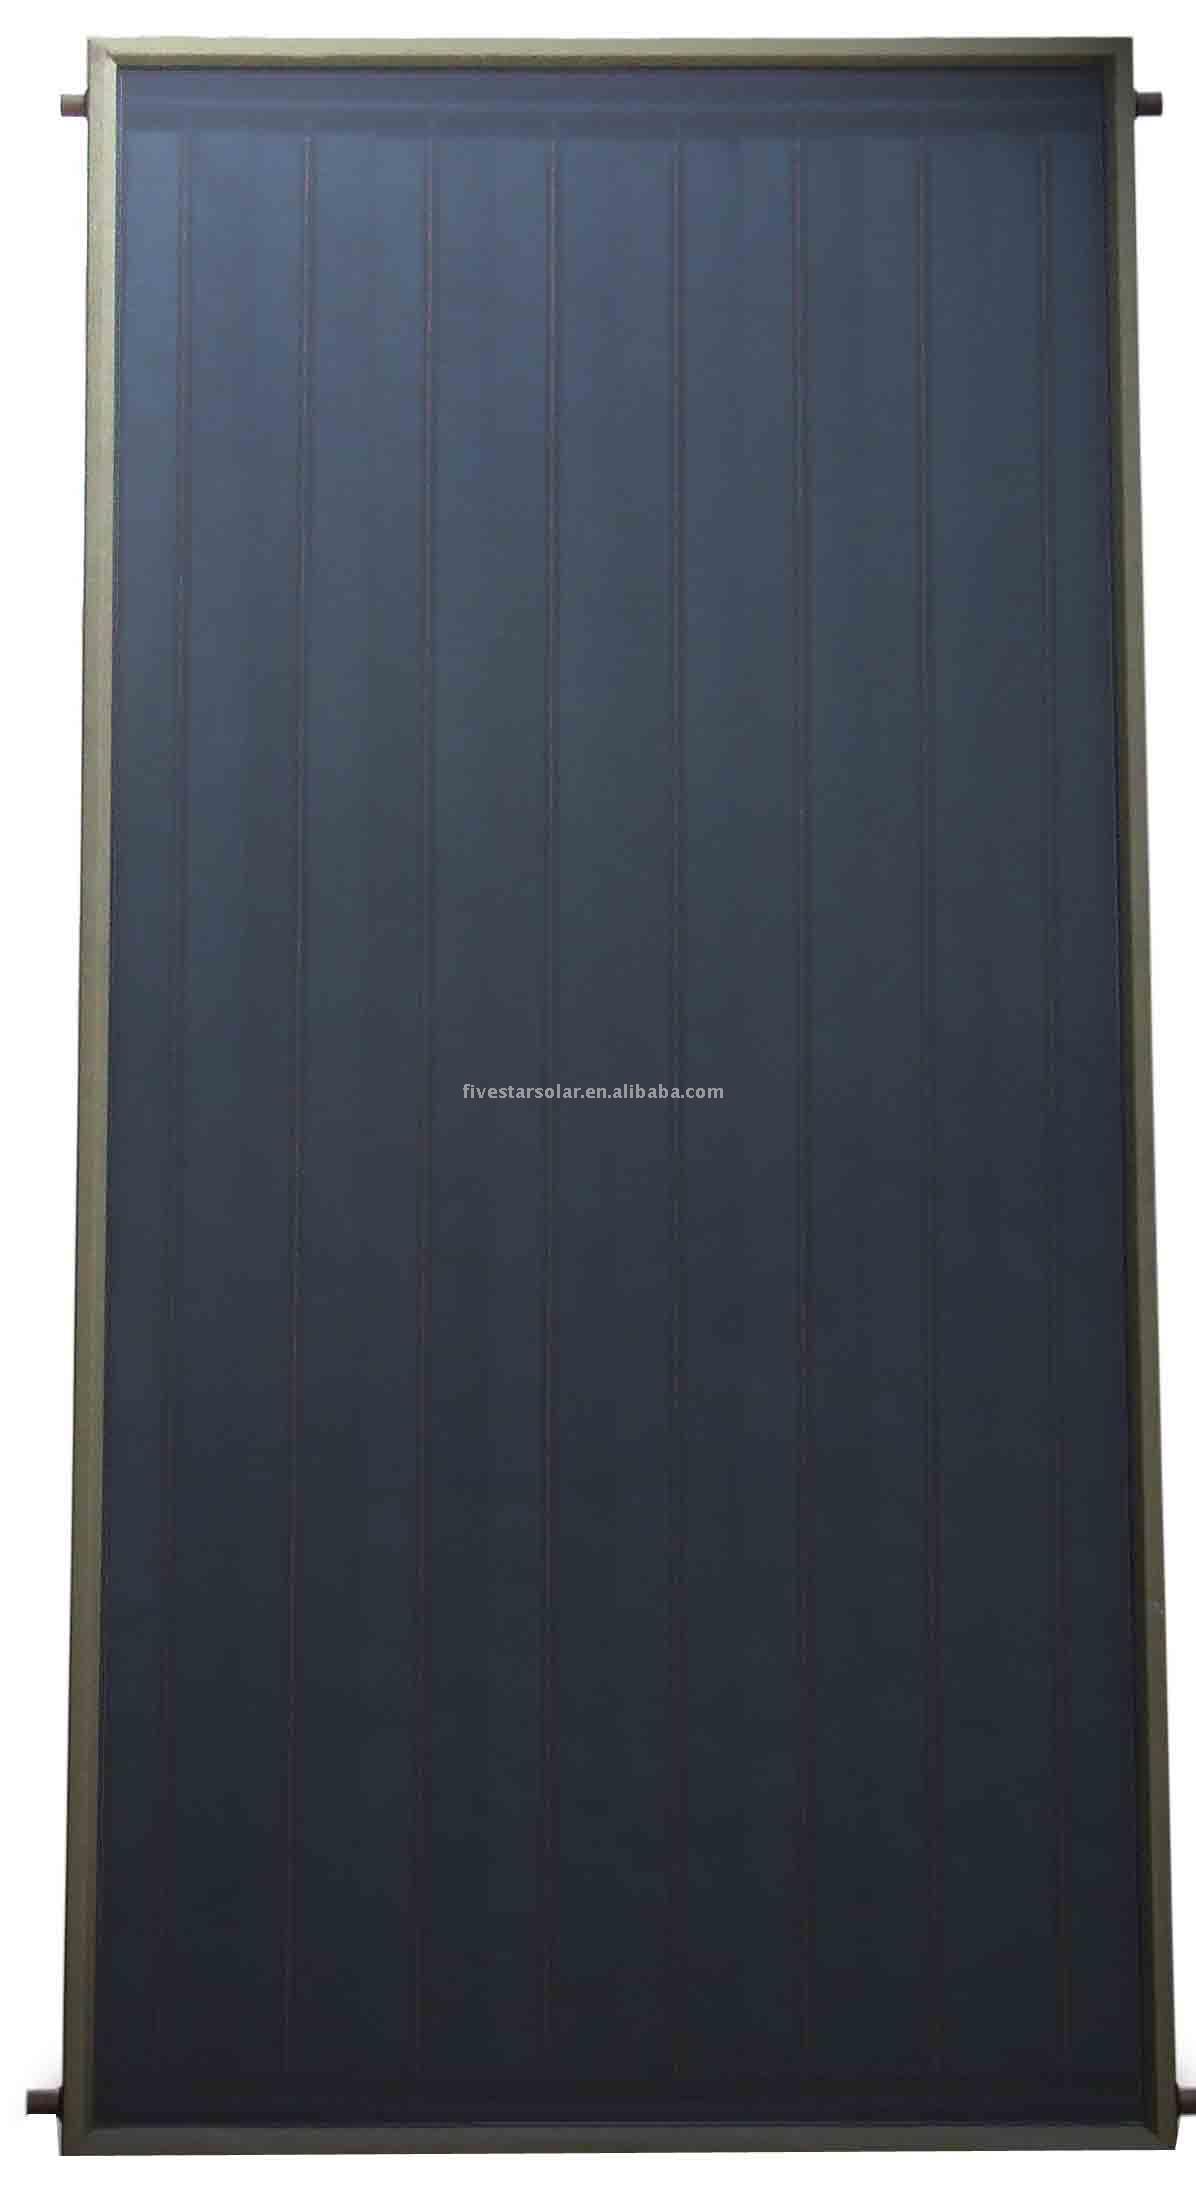  FP-3.0A Flat Plate Solar Collector (FP-3.0A Flat Plate Solar Collector)